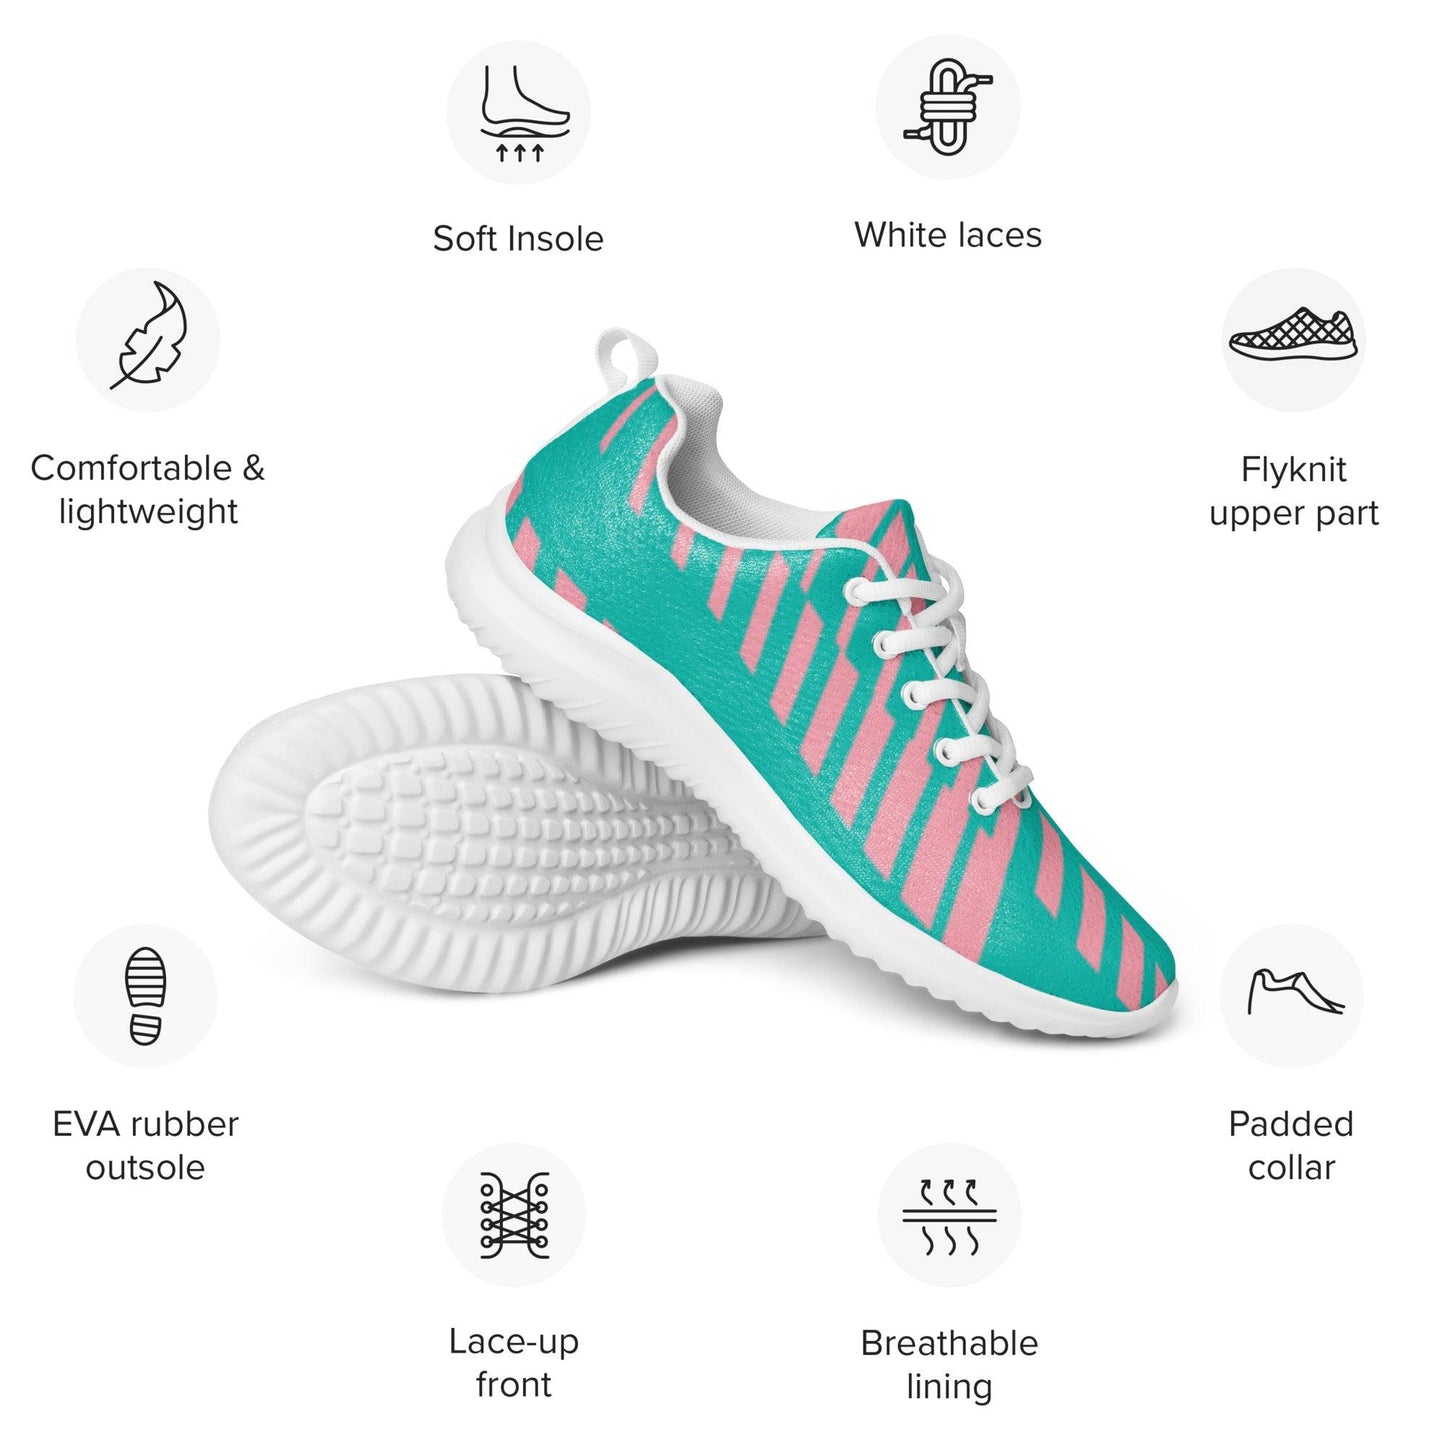 Teal Pink Stripe Women’s athletic shoes - L & M Kee, LLC